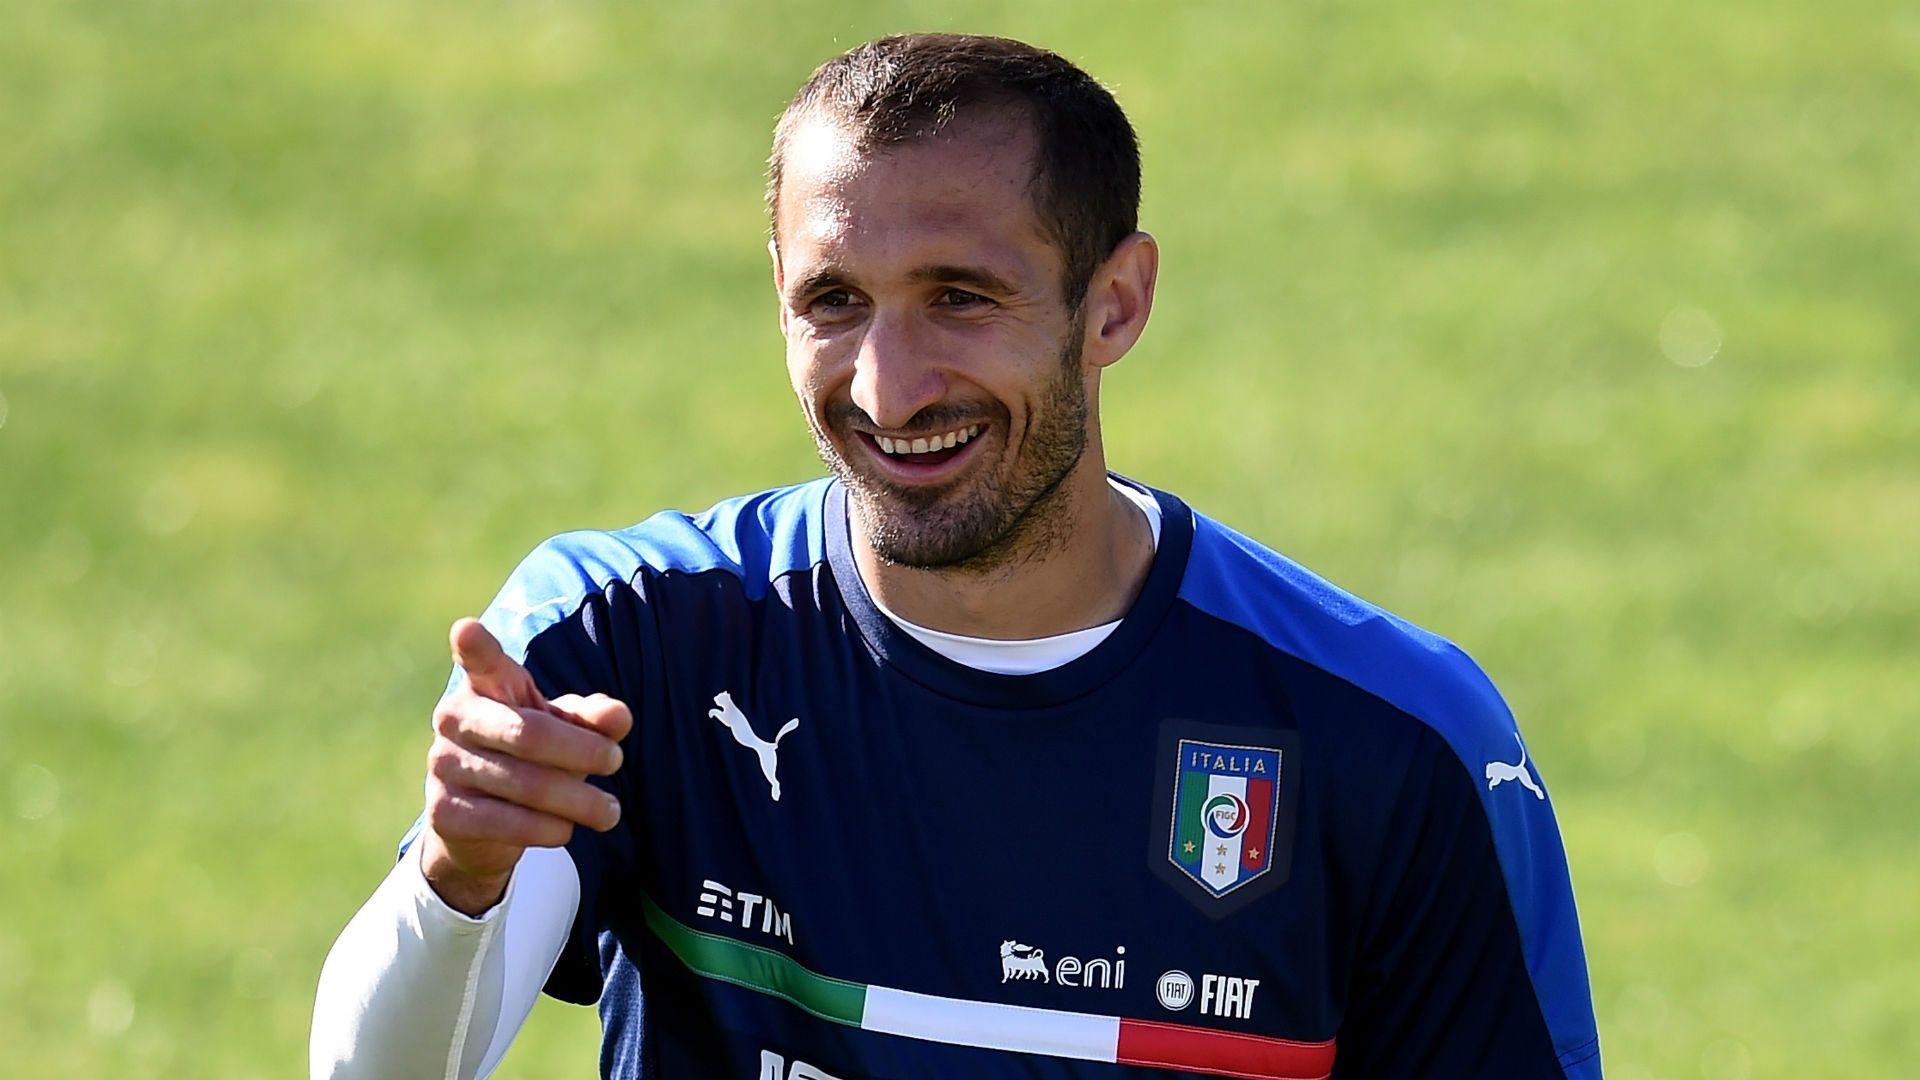 Defence can lead Italy to Euro success